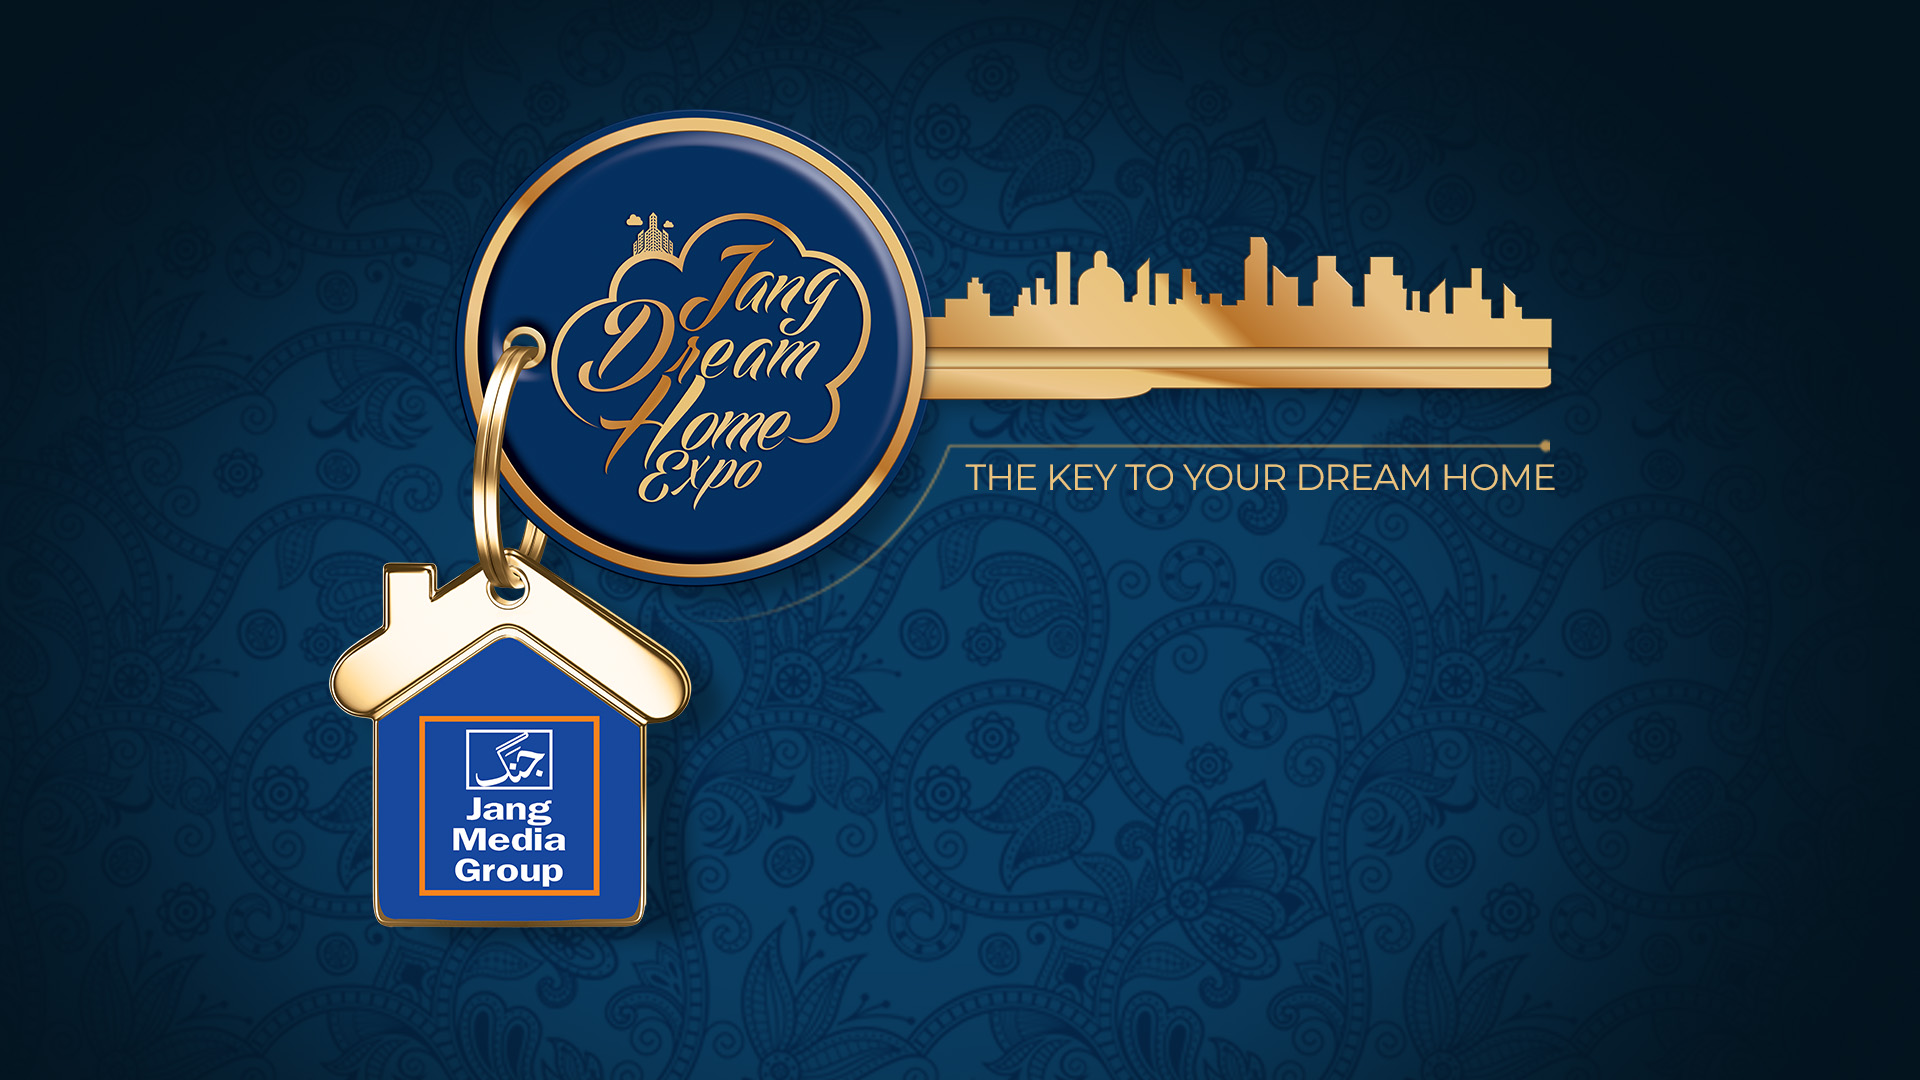 Jang Dream Home Expo | The Key To Your Dream Home